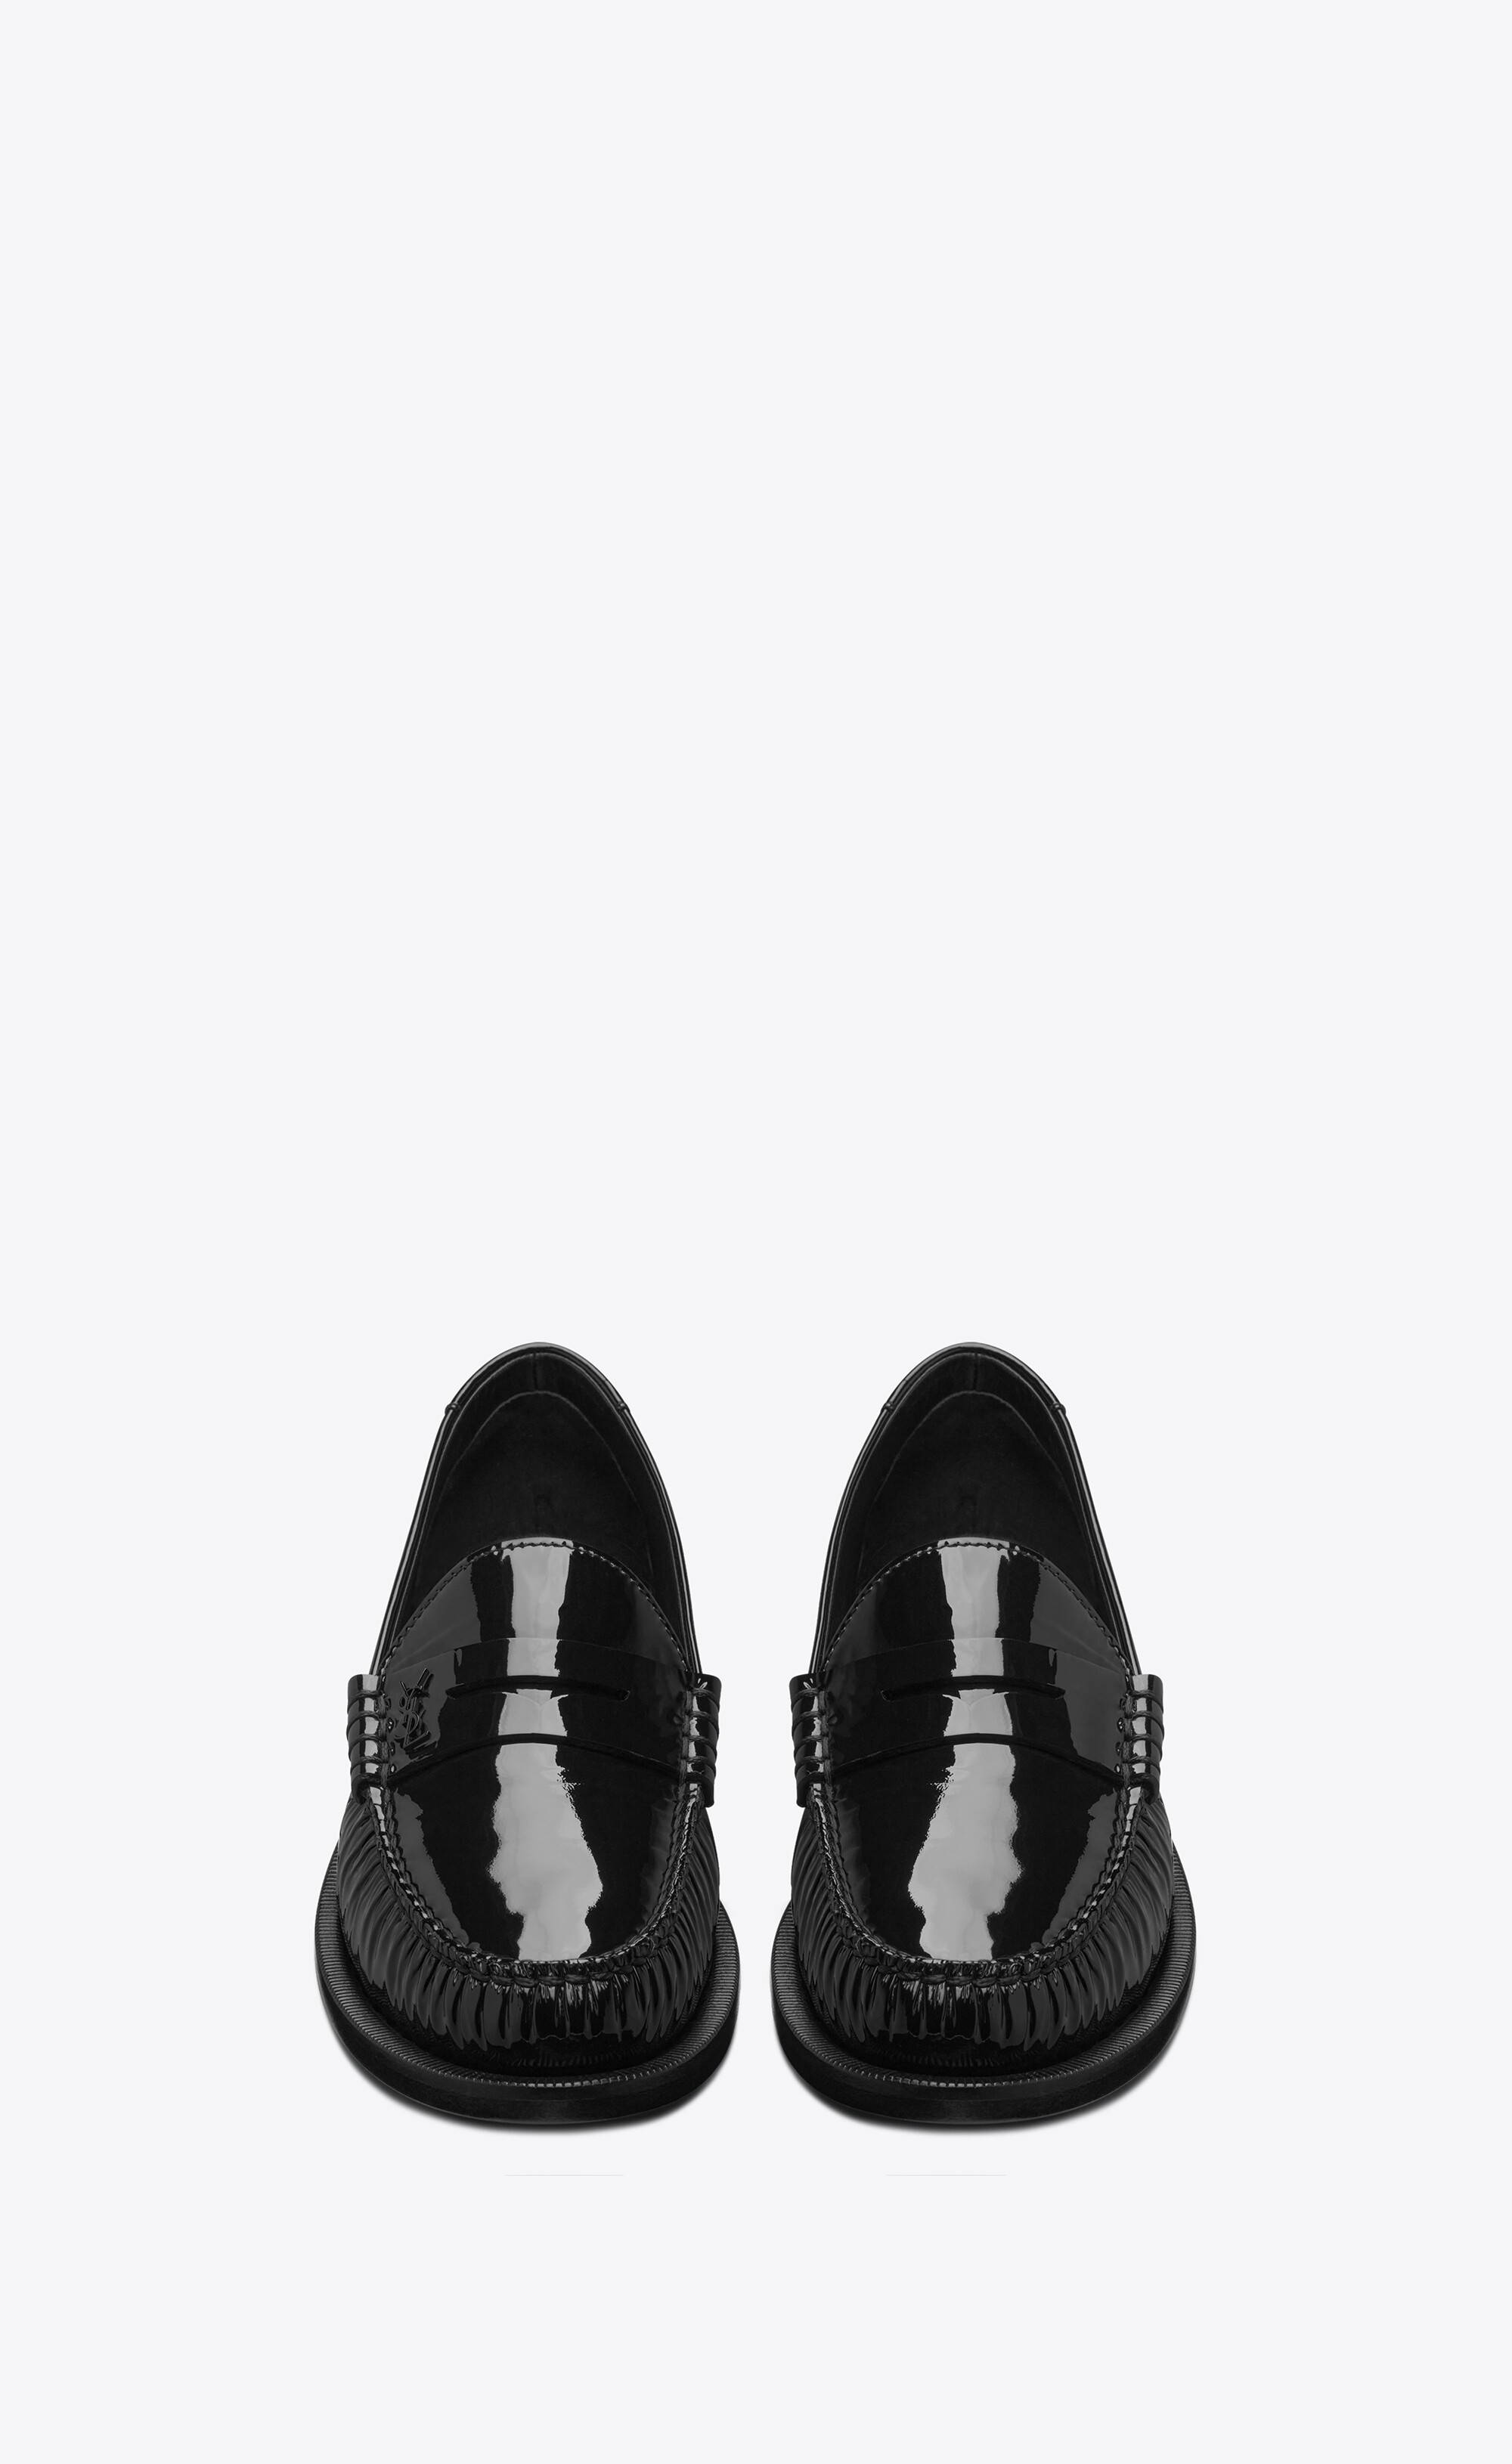 LE LOAFER penny slippers in patent leather, Saint Laurent